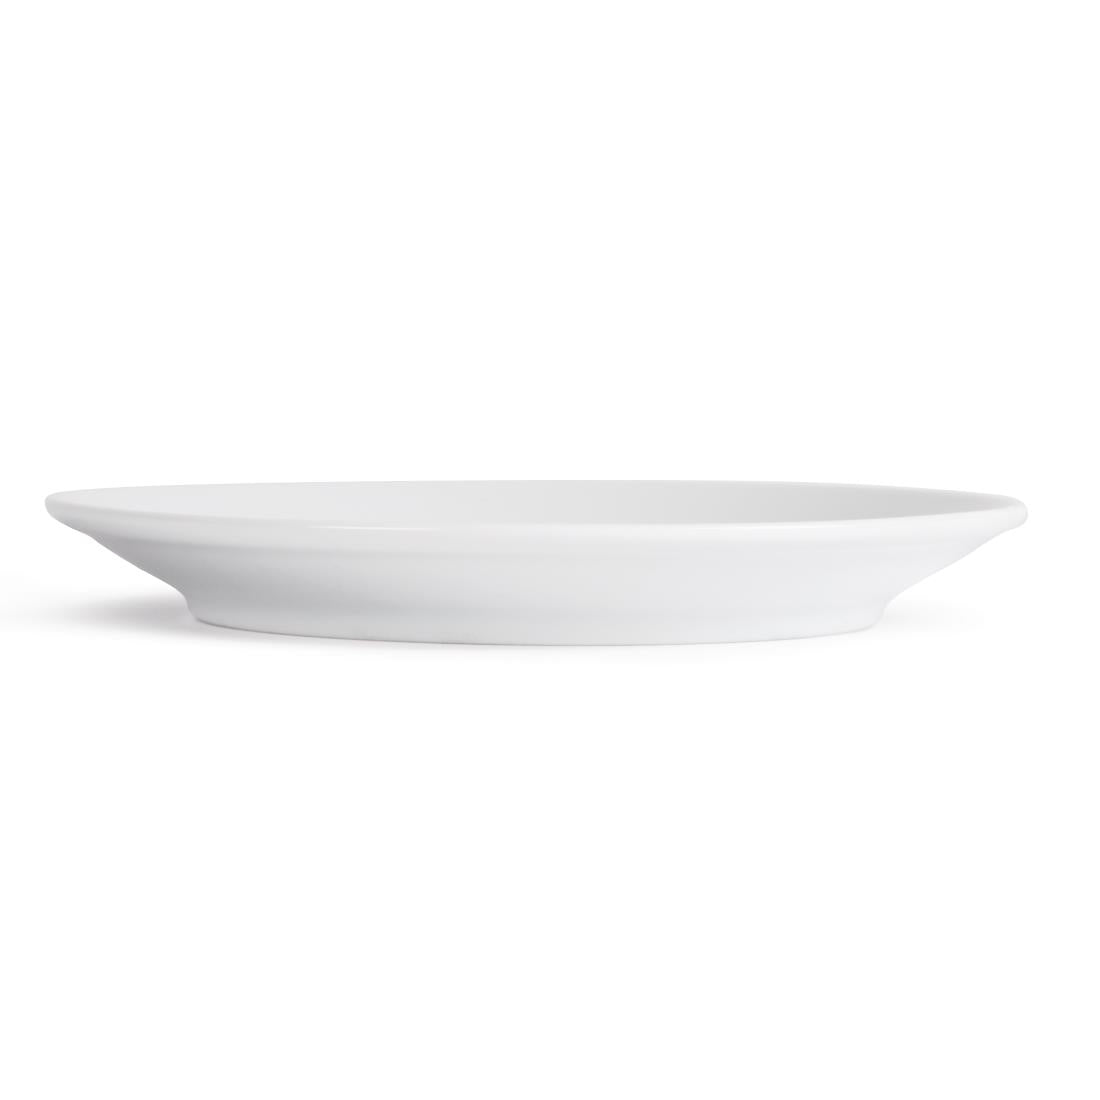 Royal Porcelain Classic White Coupe Plates 150mm (Pack of 12)